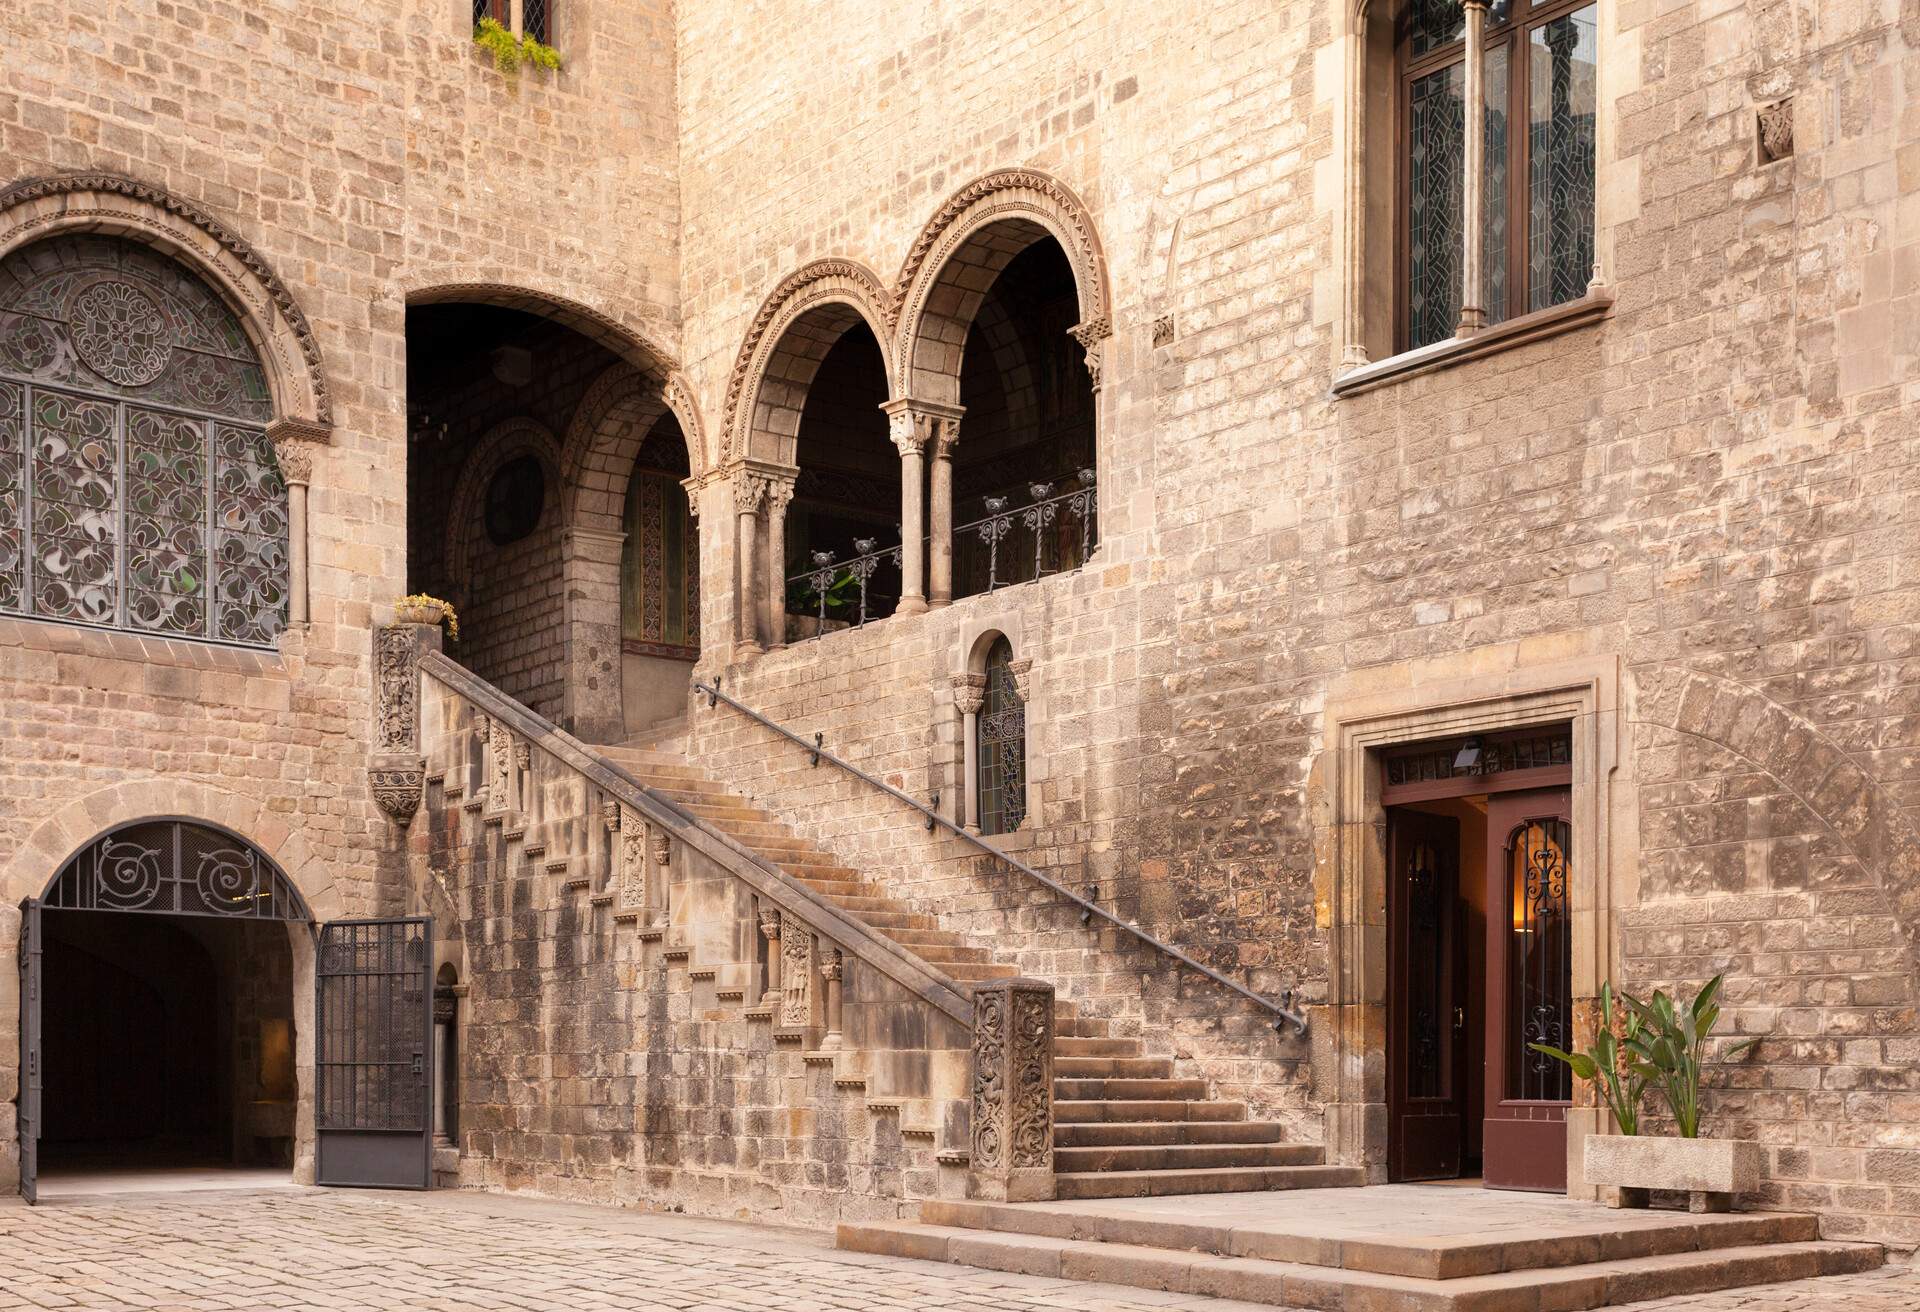 A central patio with an exterior stairway of a stone structure with arched windows.